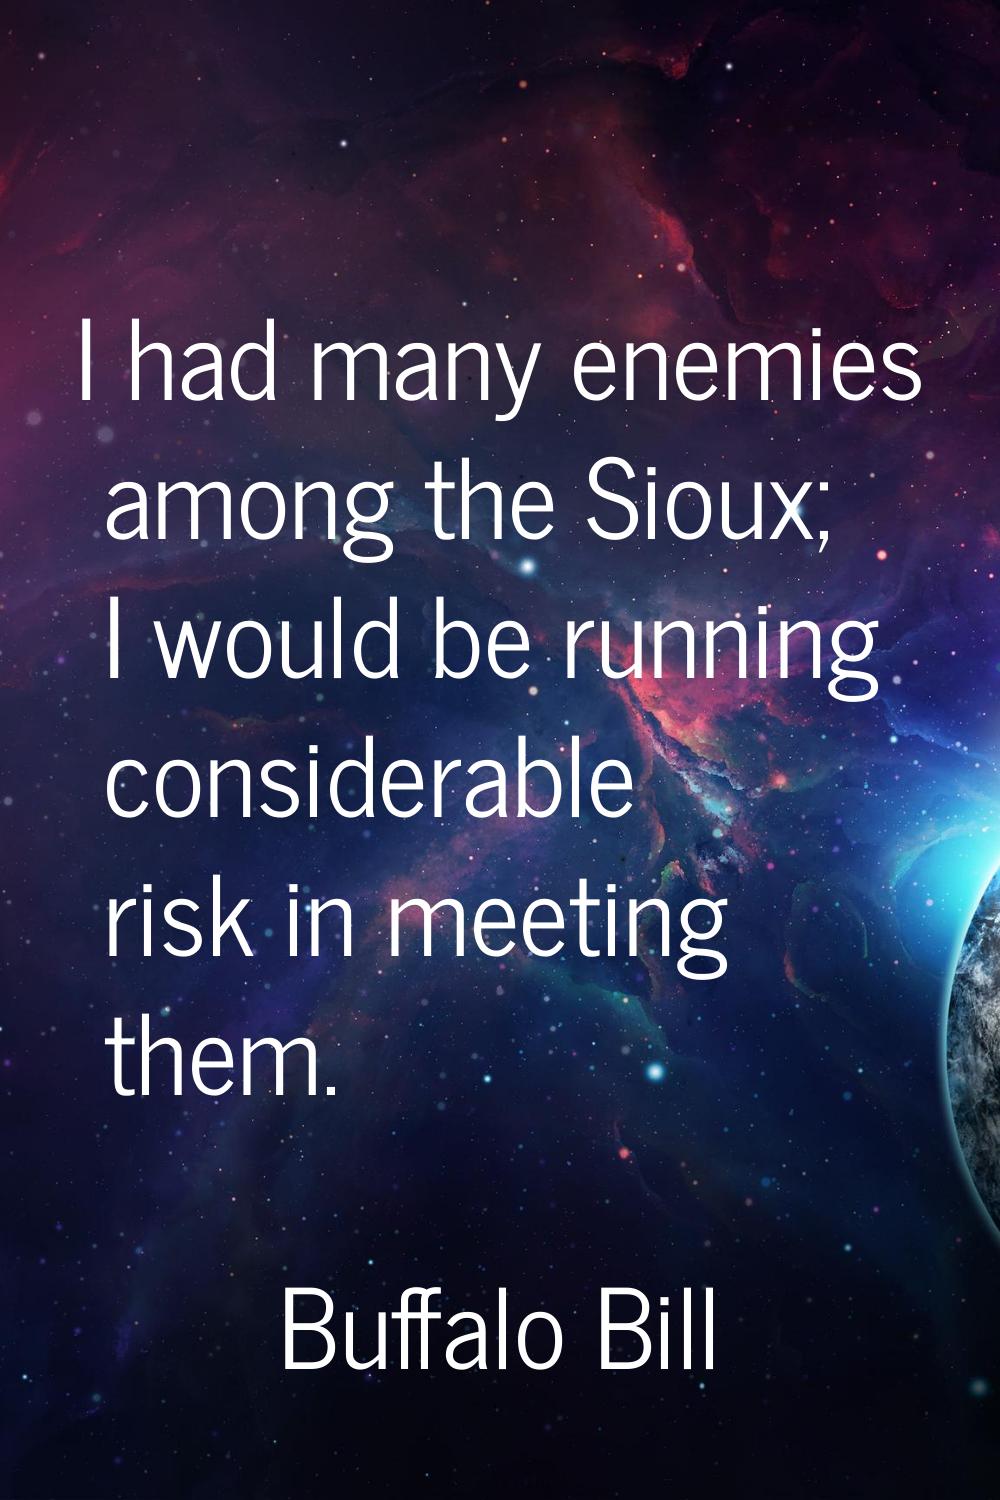 I had many enemies among the Sioux; I would be running considerable risk in meeting them.